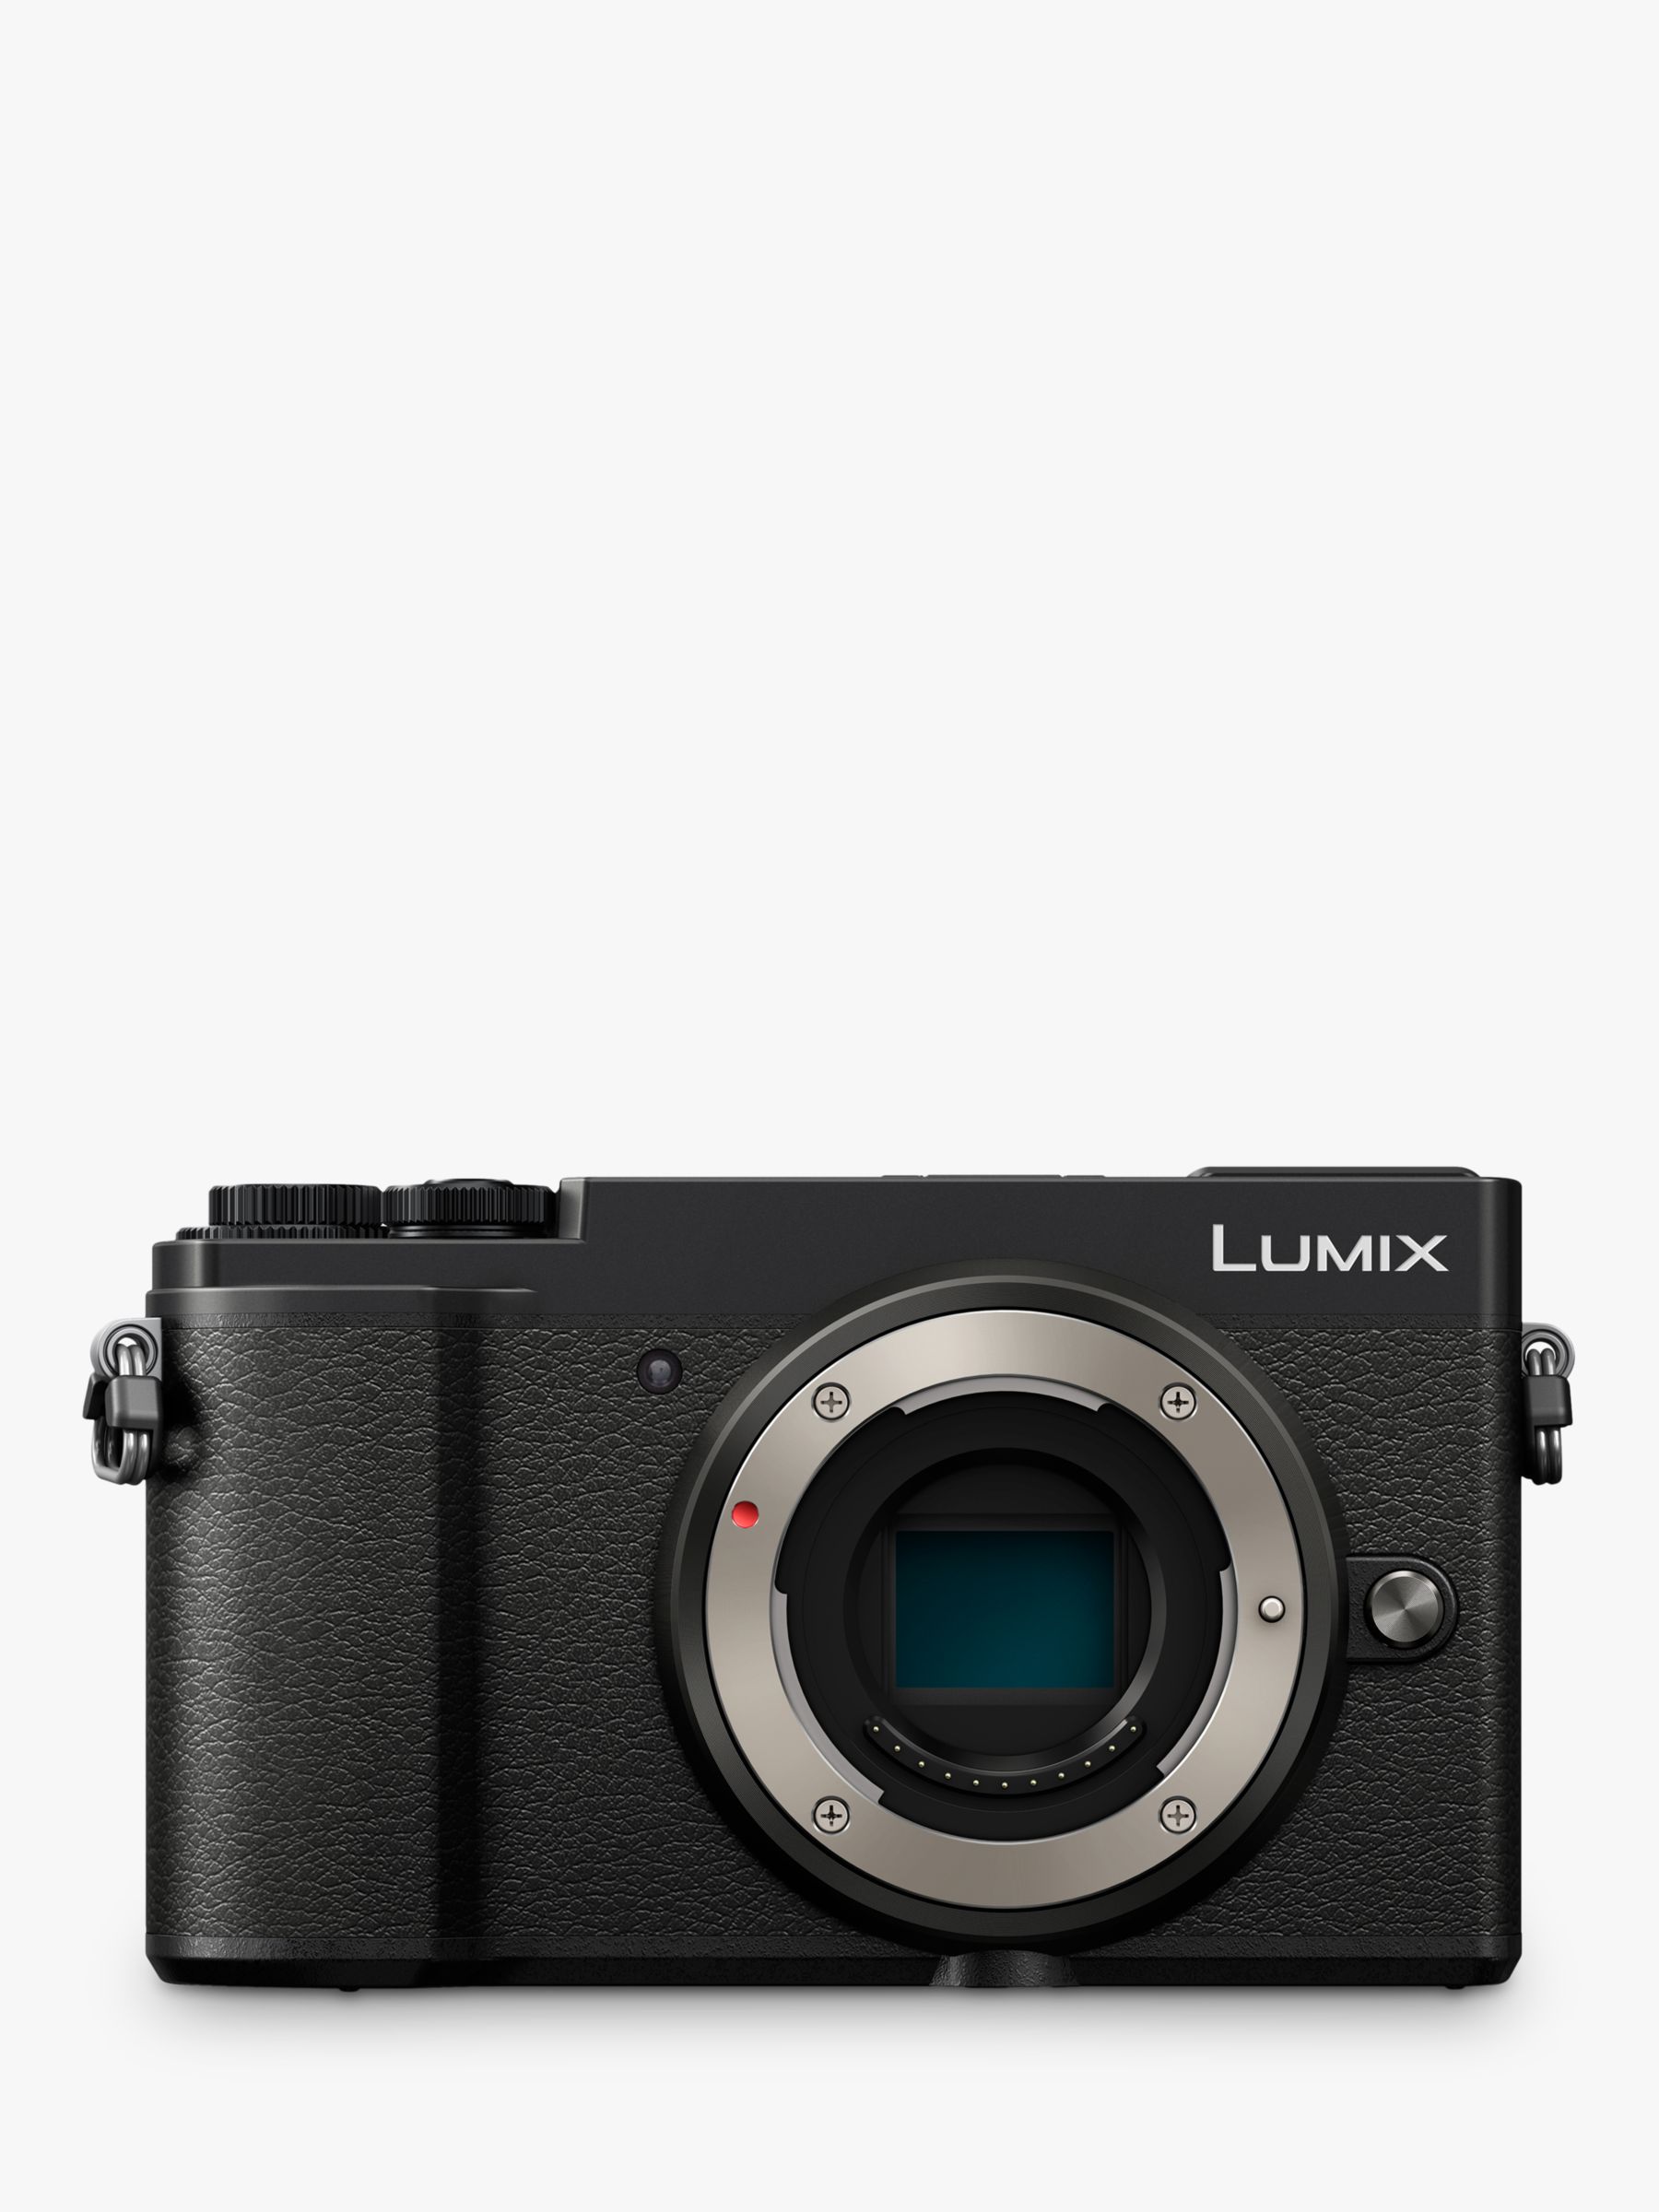 Panasonic Lumix DC-GX9 Compact System Camera, 4K Ultra HD, 20.3MP, Wi-Fi, Bluetooth, Tiltable EVF, 3 Tiltable Touch Screen, Body Only, Black